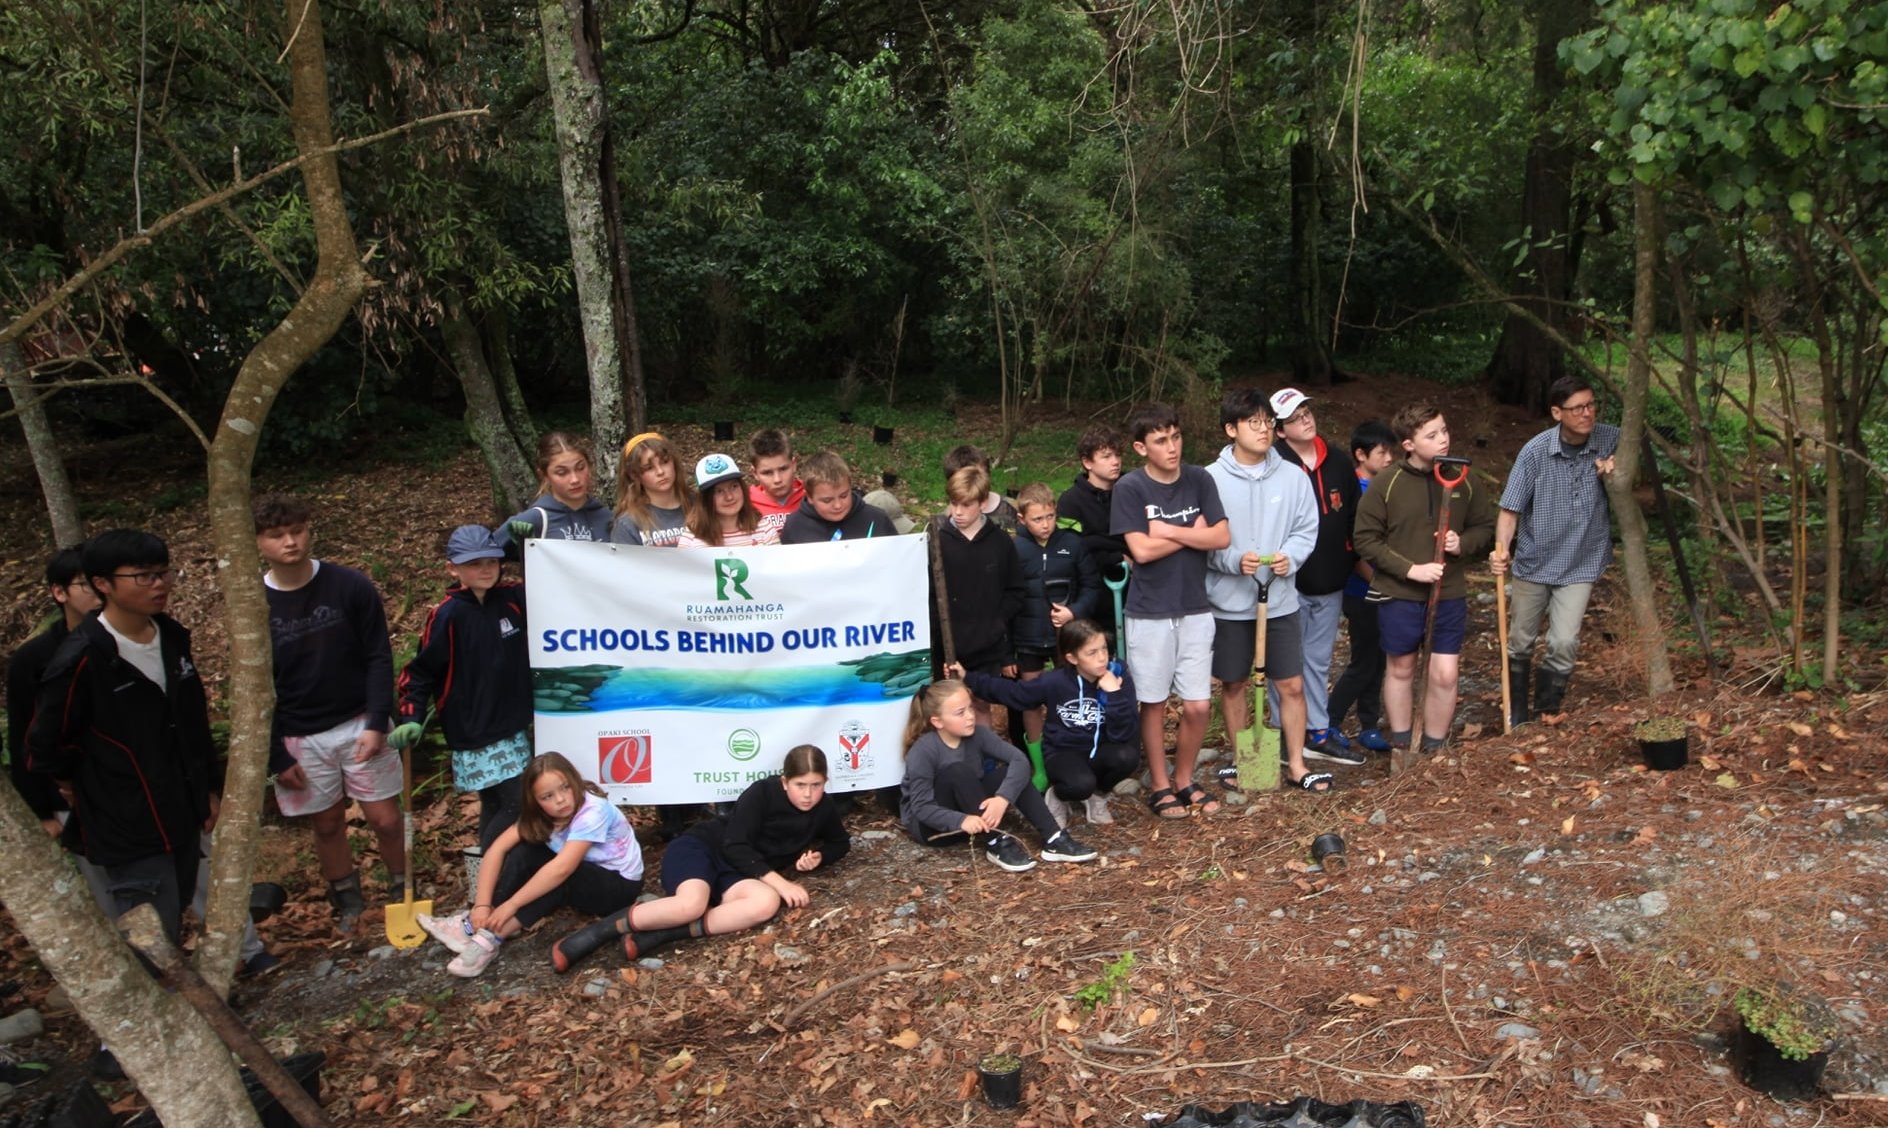 Group of students at a “Schools behind our river” planting day